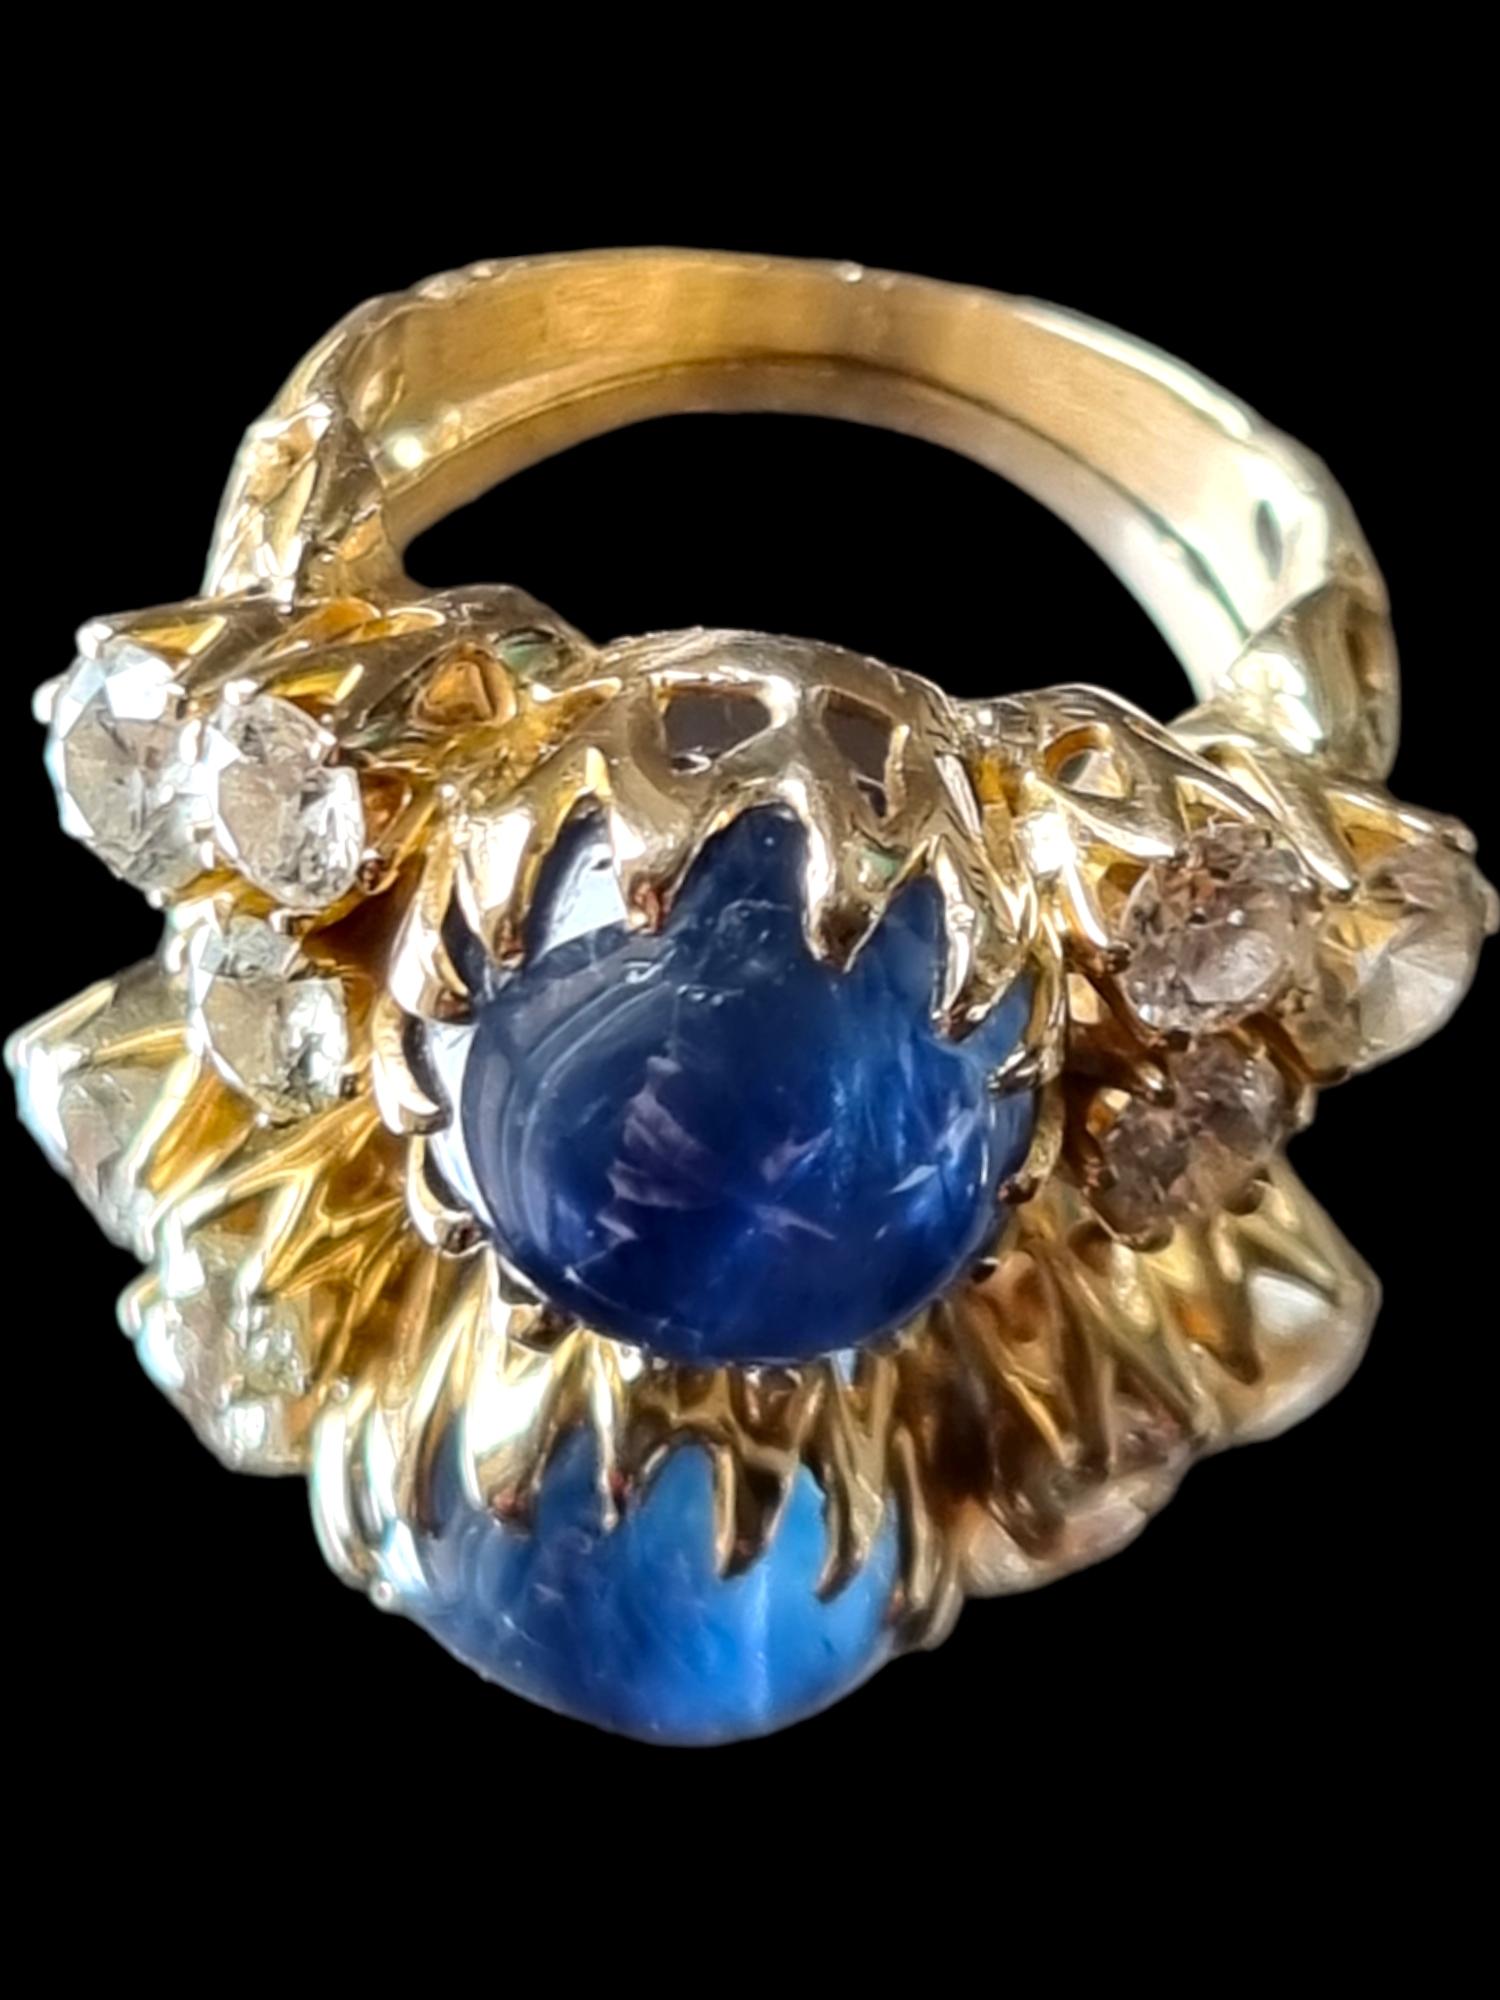 Cabochon Antique Burmese Certified 10.18 Carat Blue Star Sapphire and Diamond Ring For Sale